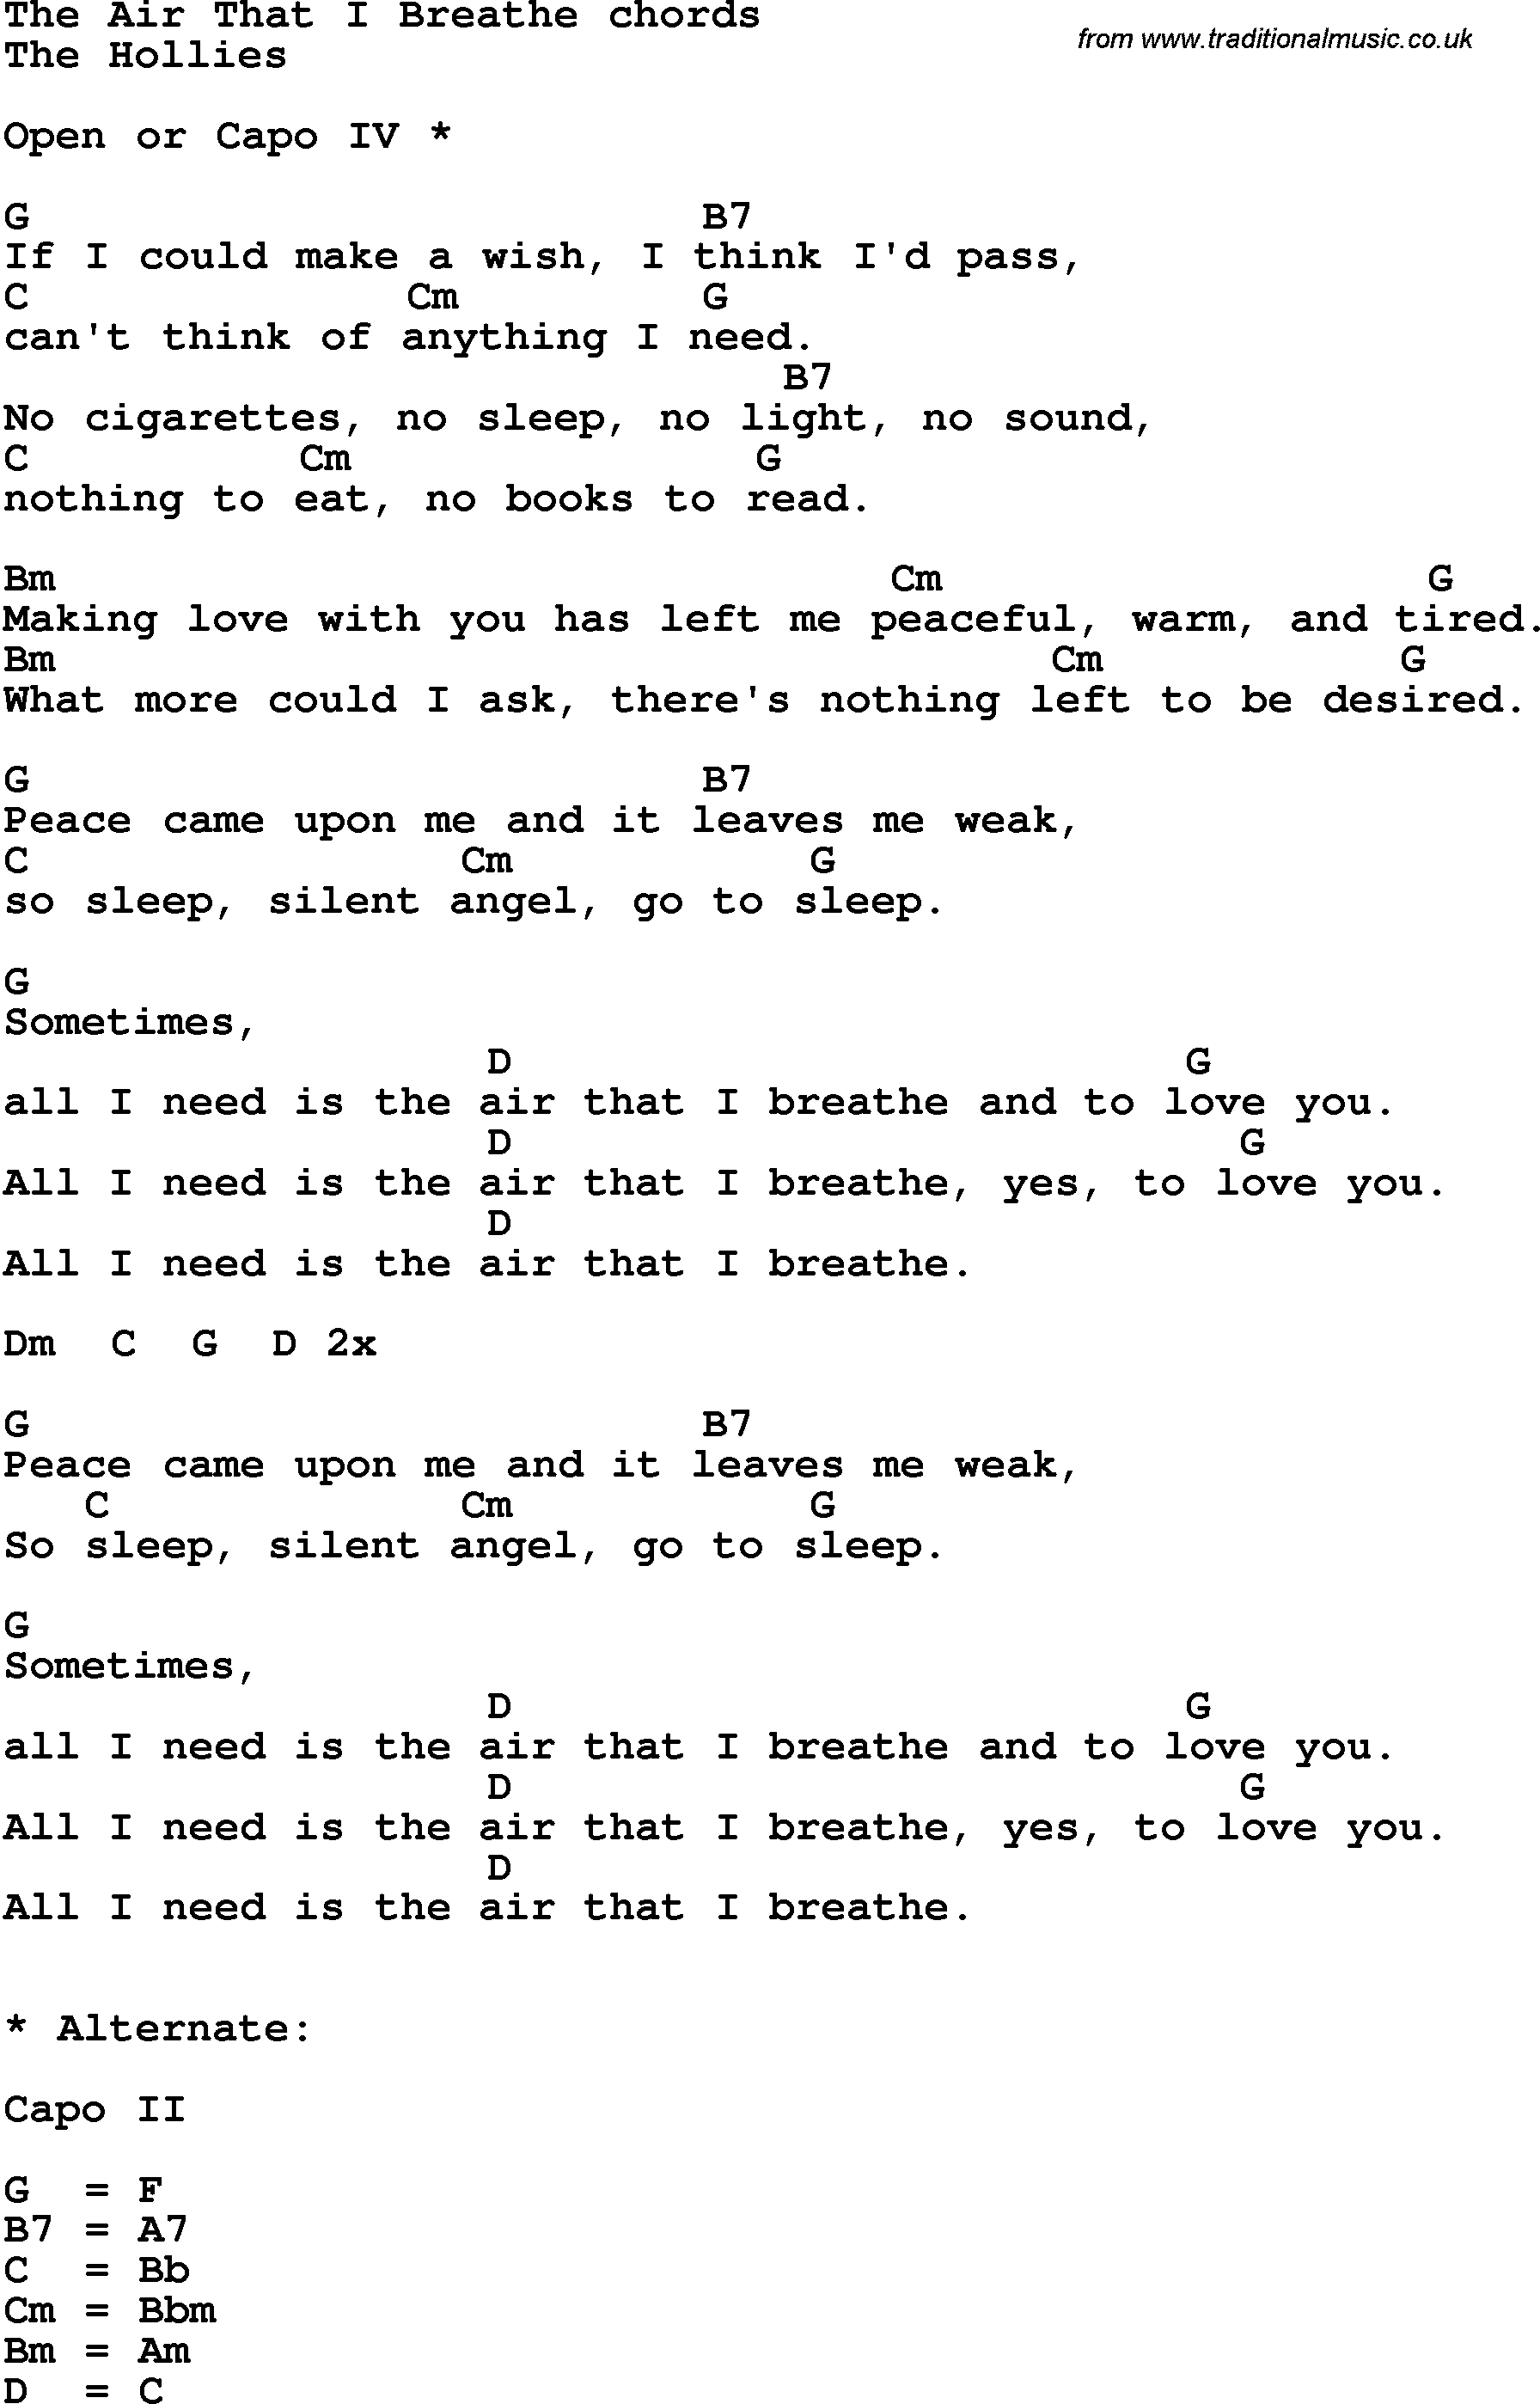 Song Lyrics with guitar chords for The Air That I Breathe